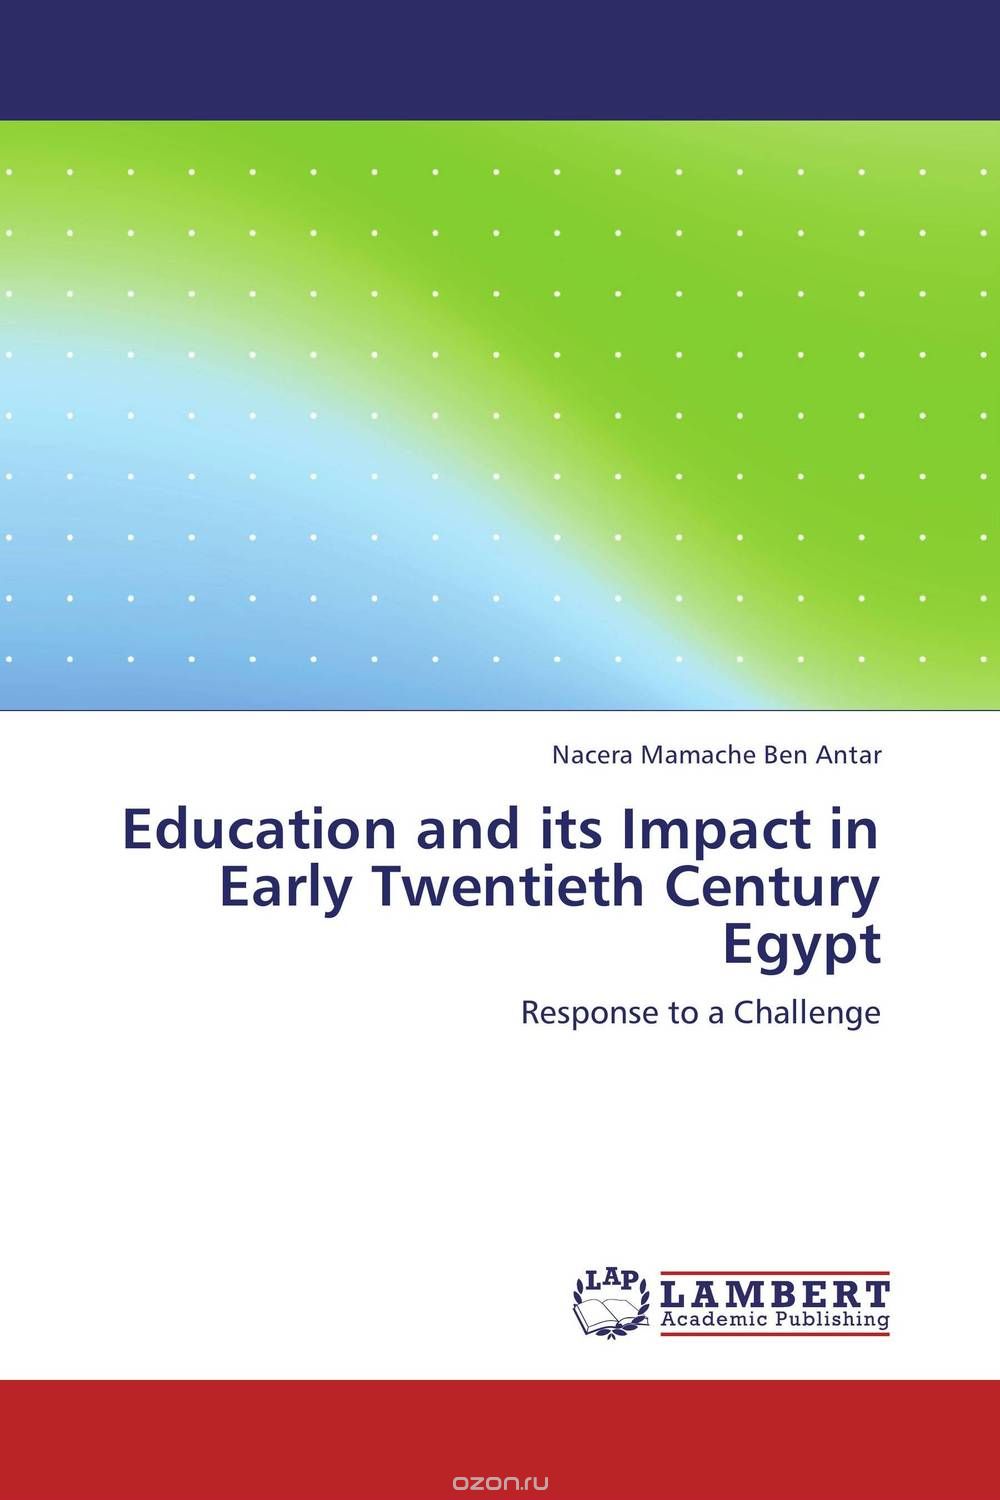 Education and its Impact in Early Twentieth Century Egypt